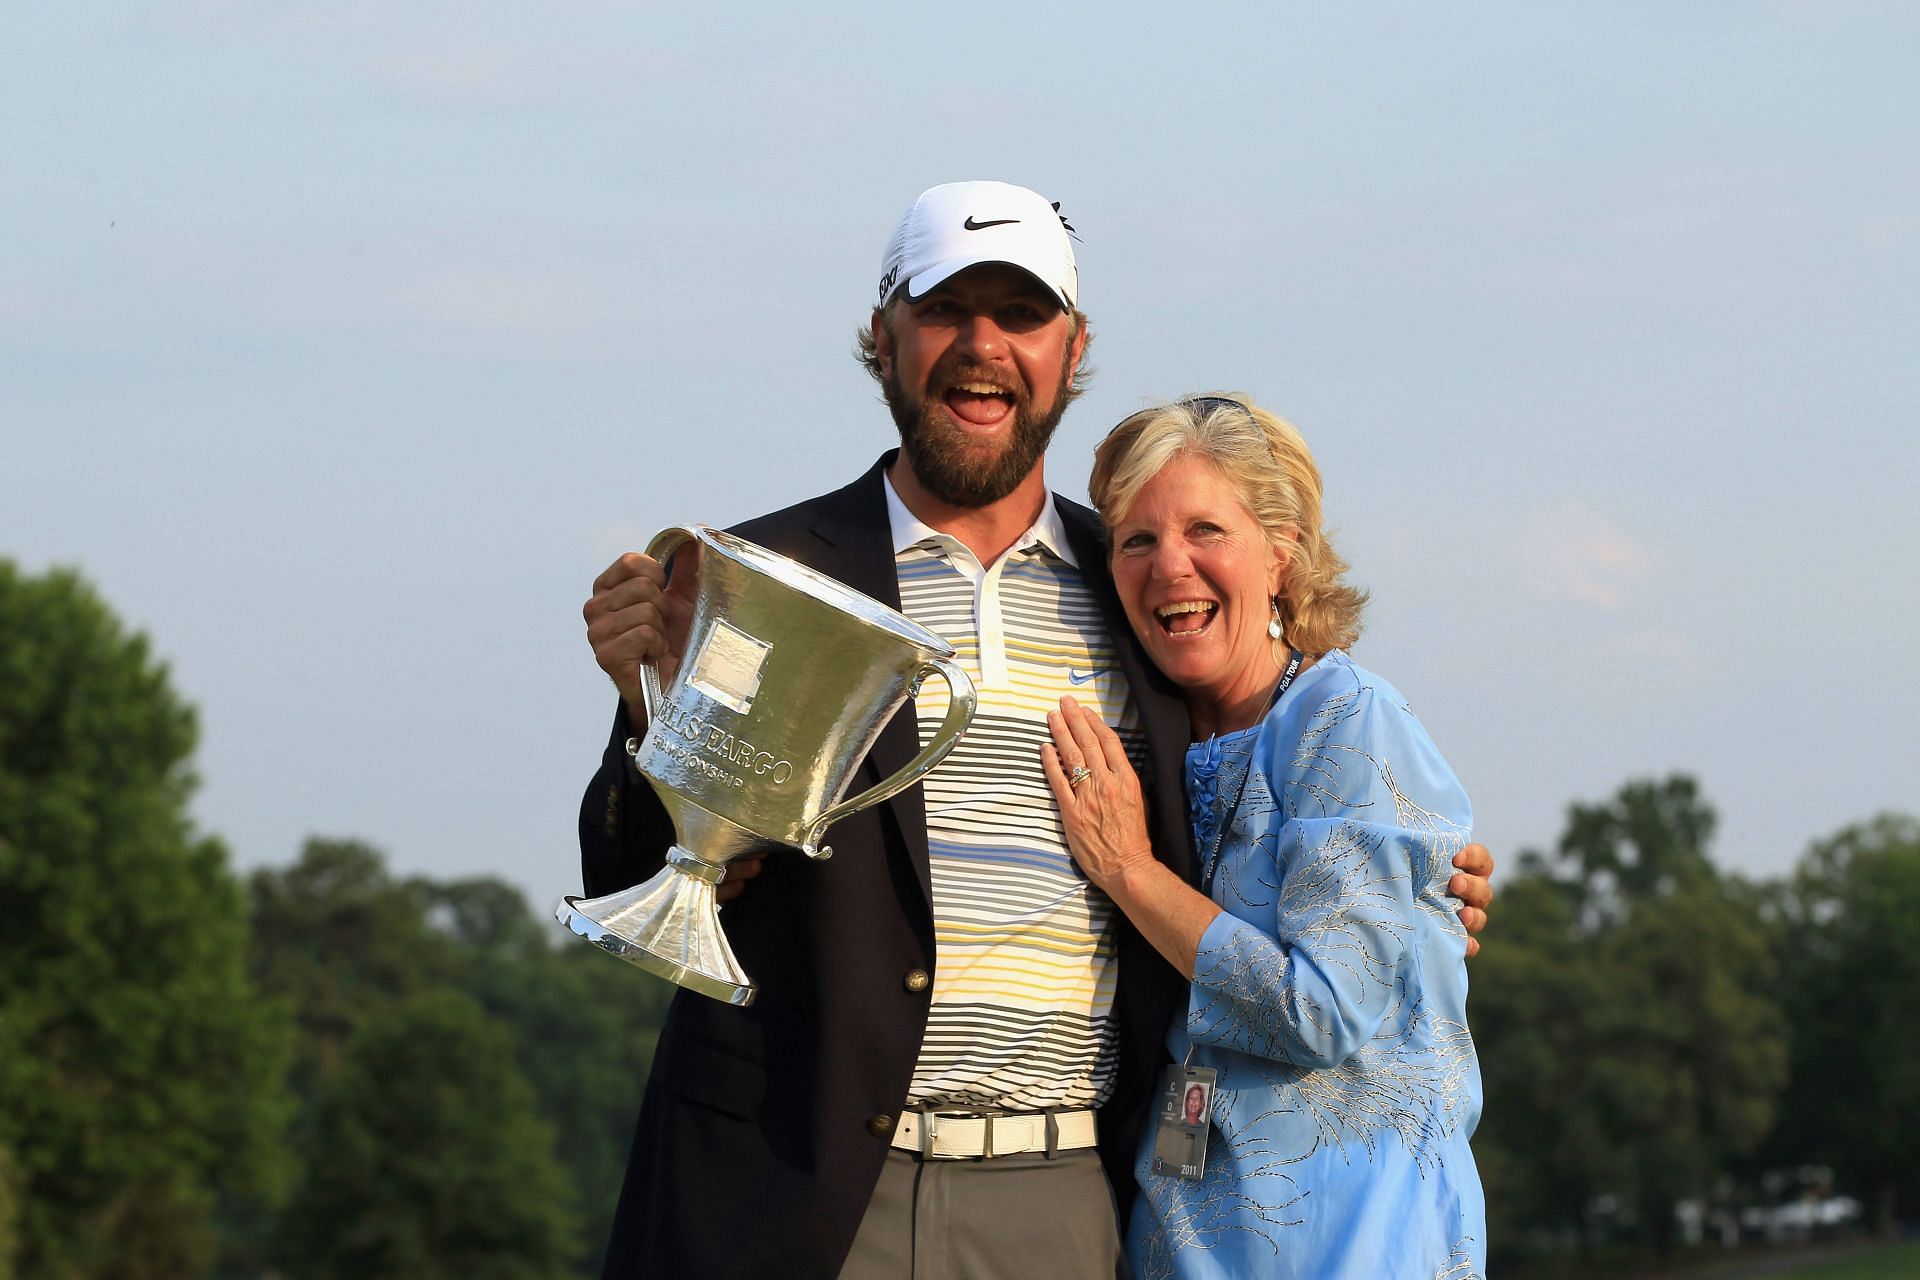 Lucas Glover, after winning the Wells Fargo Championship in 2011 (Image via Getty)